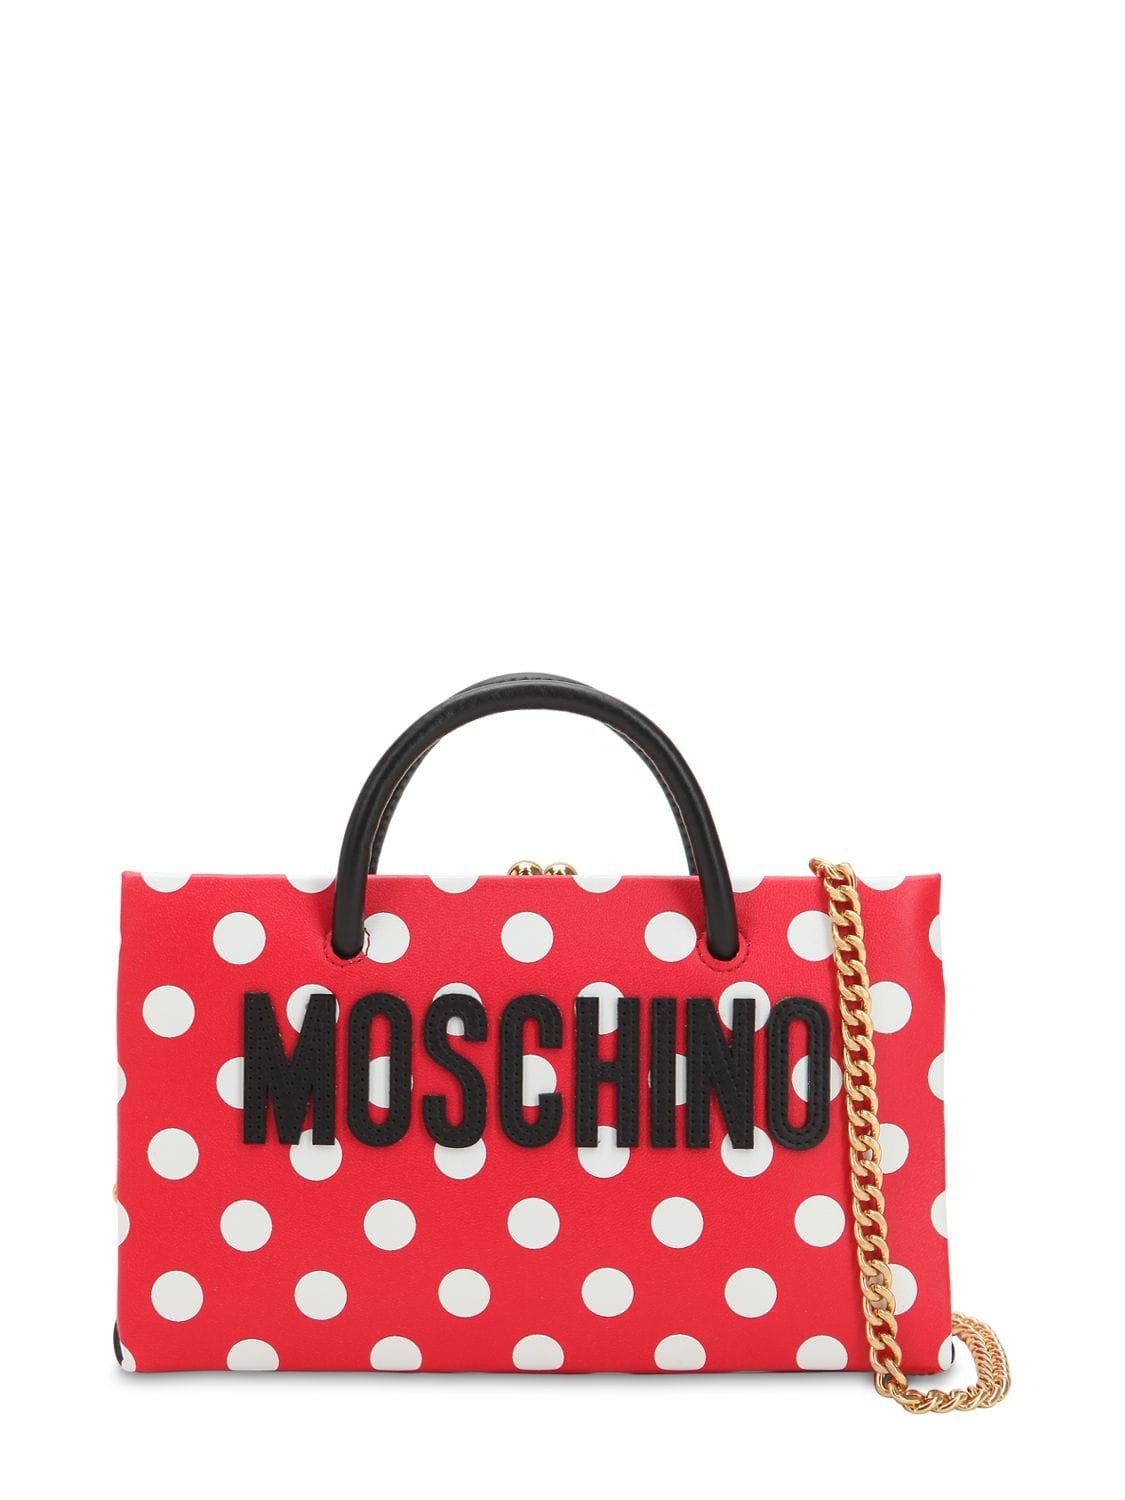 Gold Dot Logo - Moschino Dot Logo Printed Leather Shoulder Bag In Red/White Dots ...